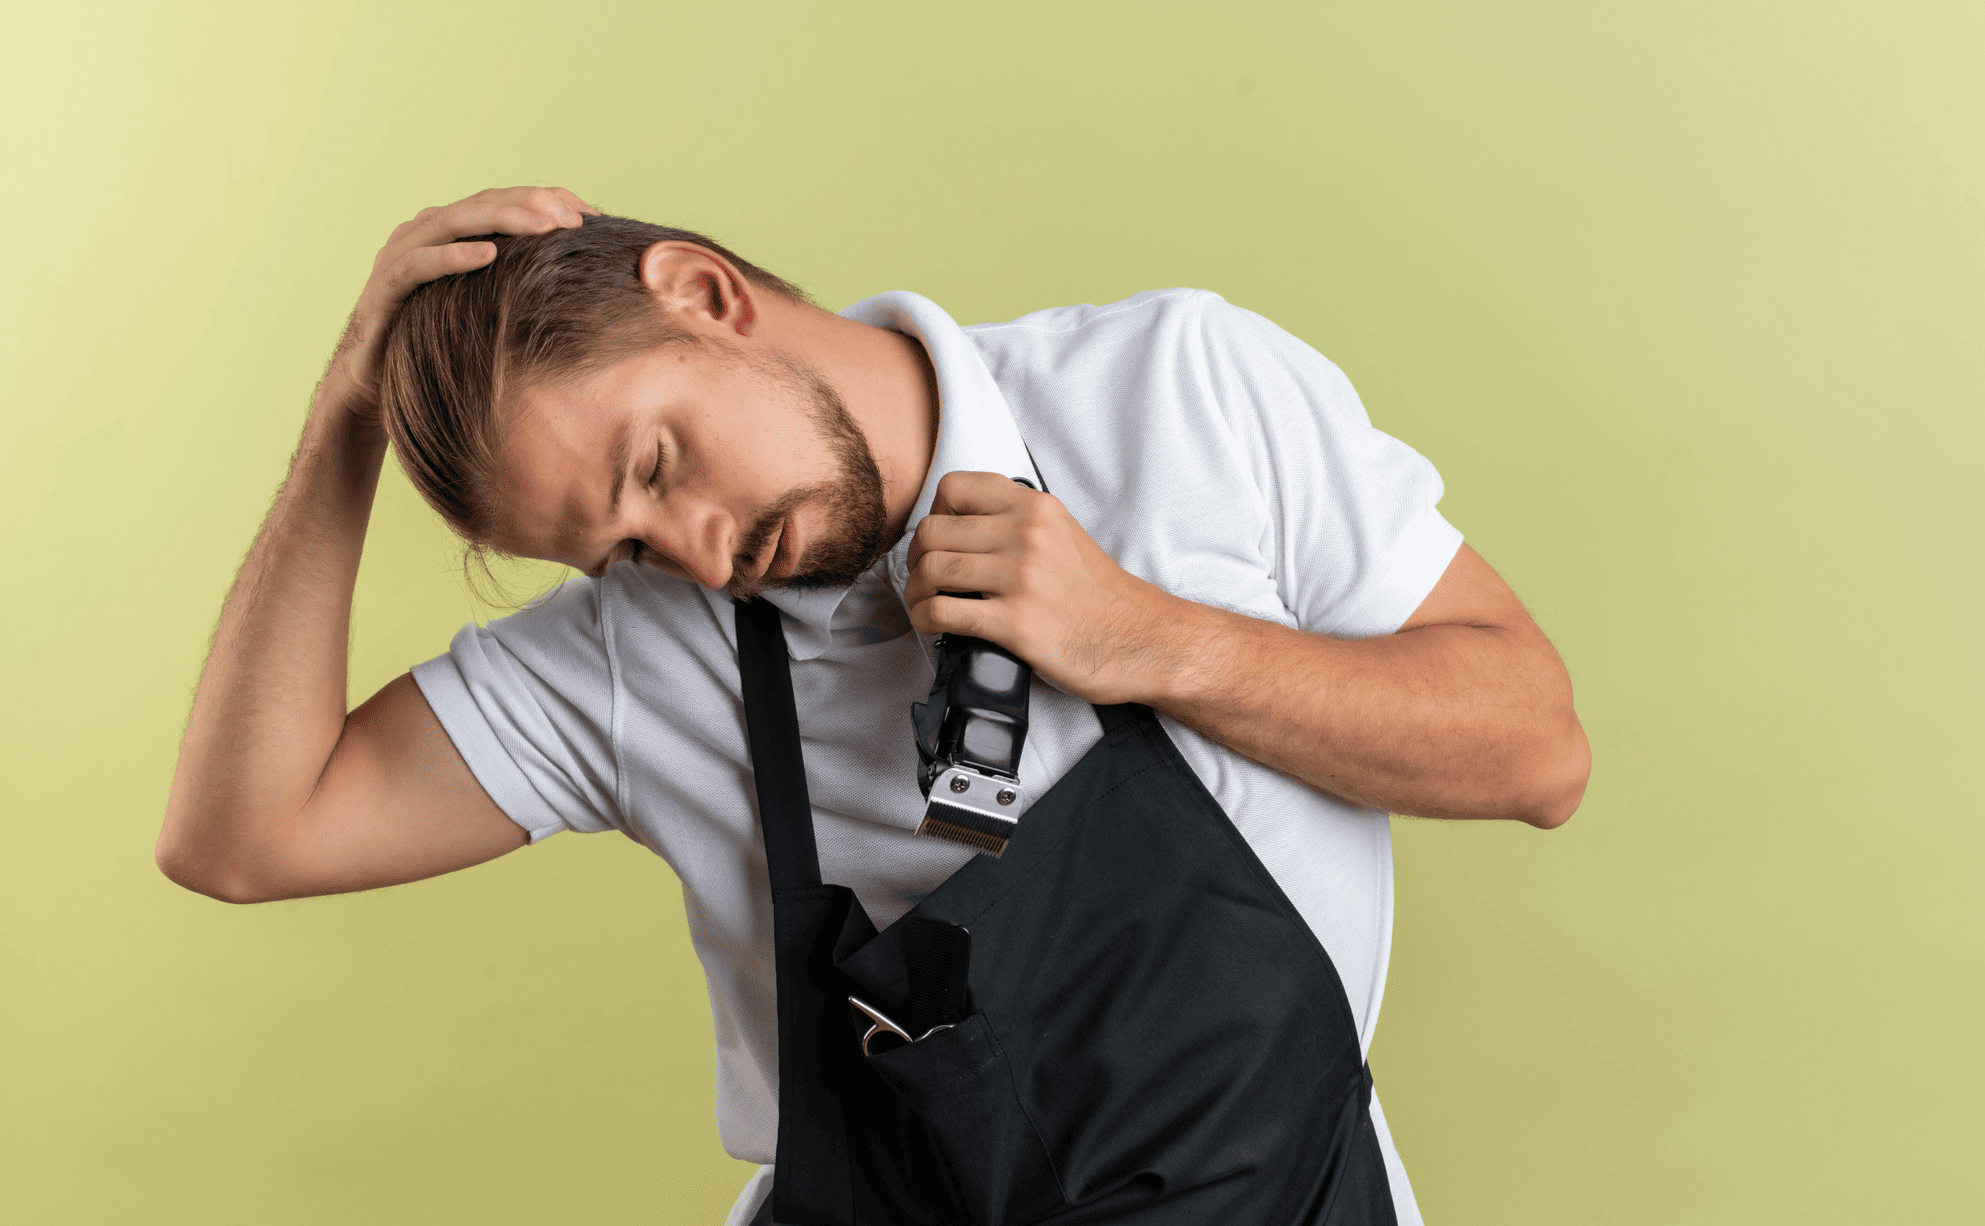 Physical Strain as a Hairstylist: Tips and Exercises for Staying Comfortable on the Job